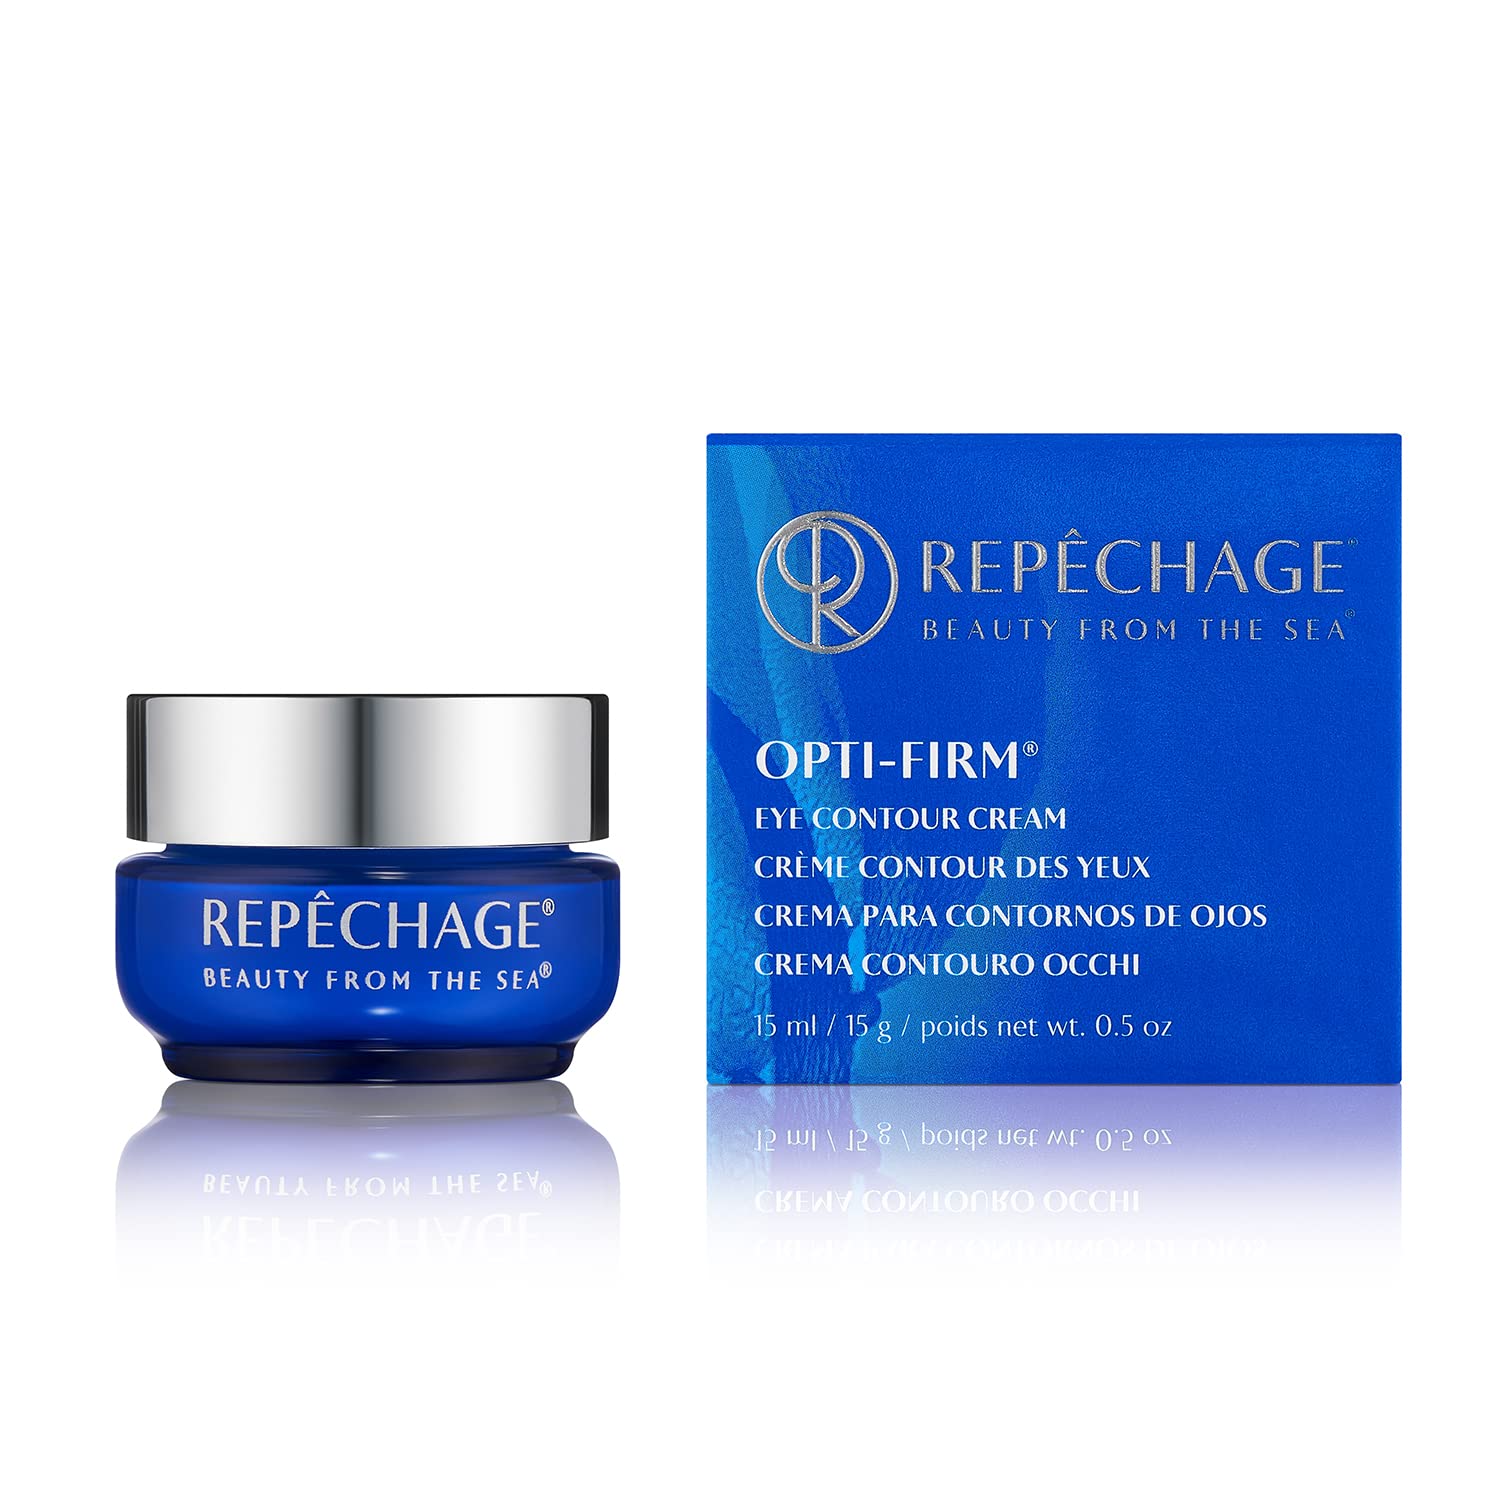 Repechage Opti Firm Eye Contour Cream For Dark Circles Puffiness and Wrinkles 0.5